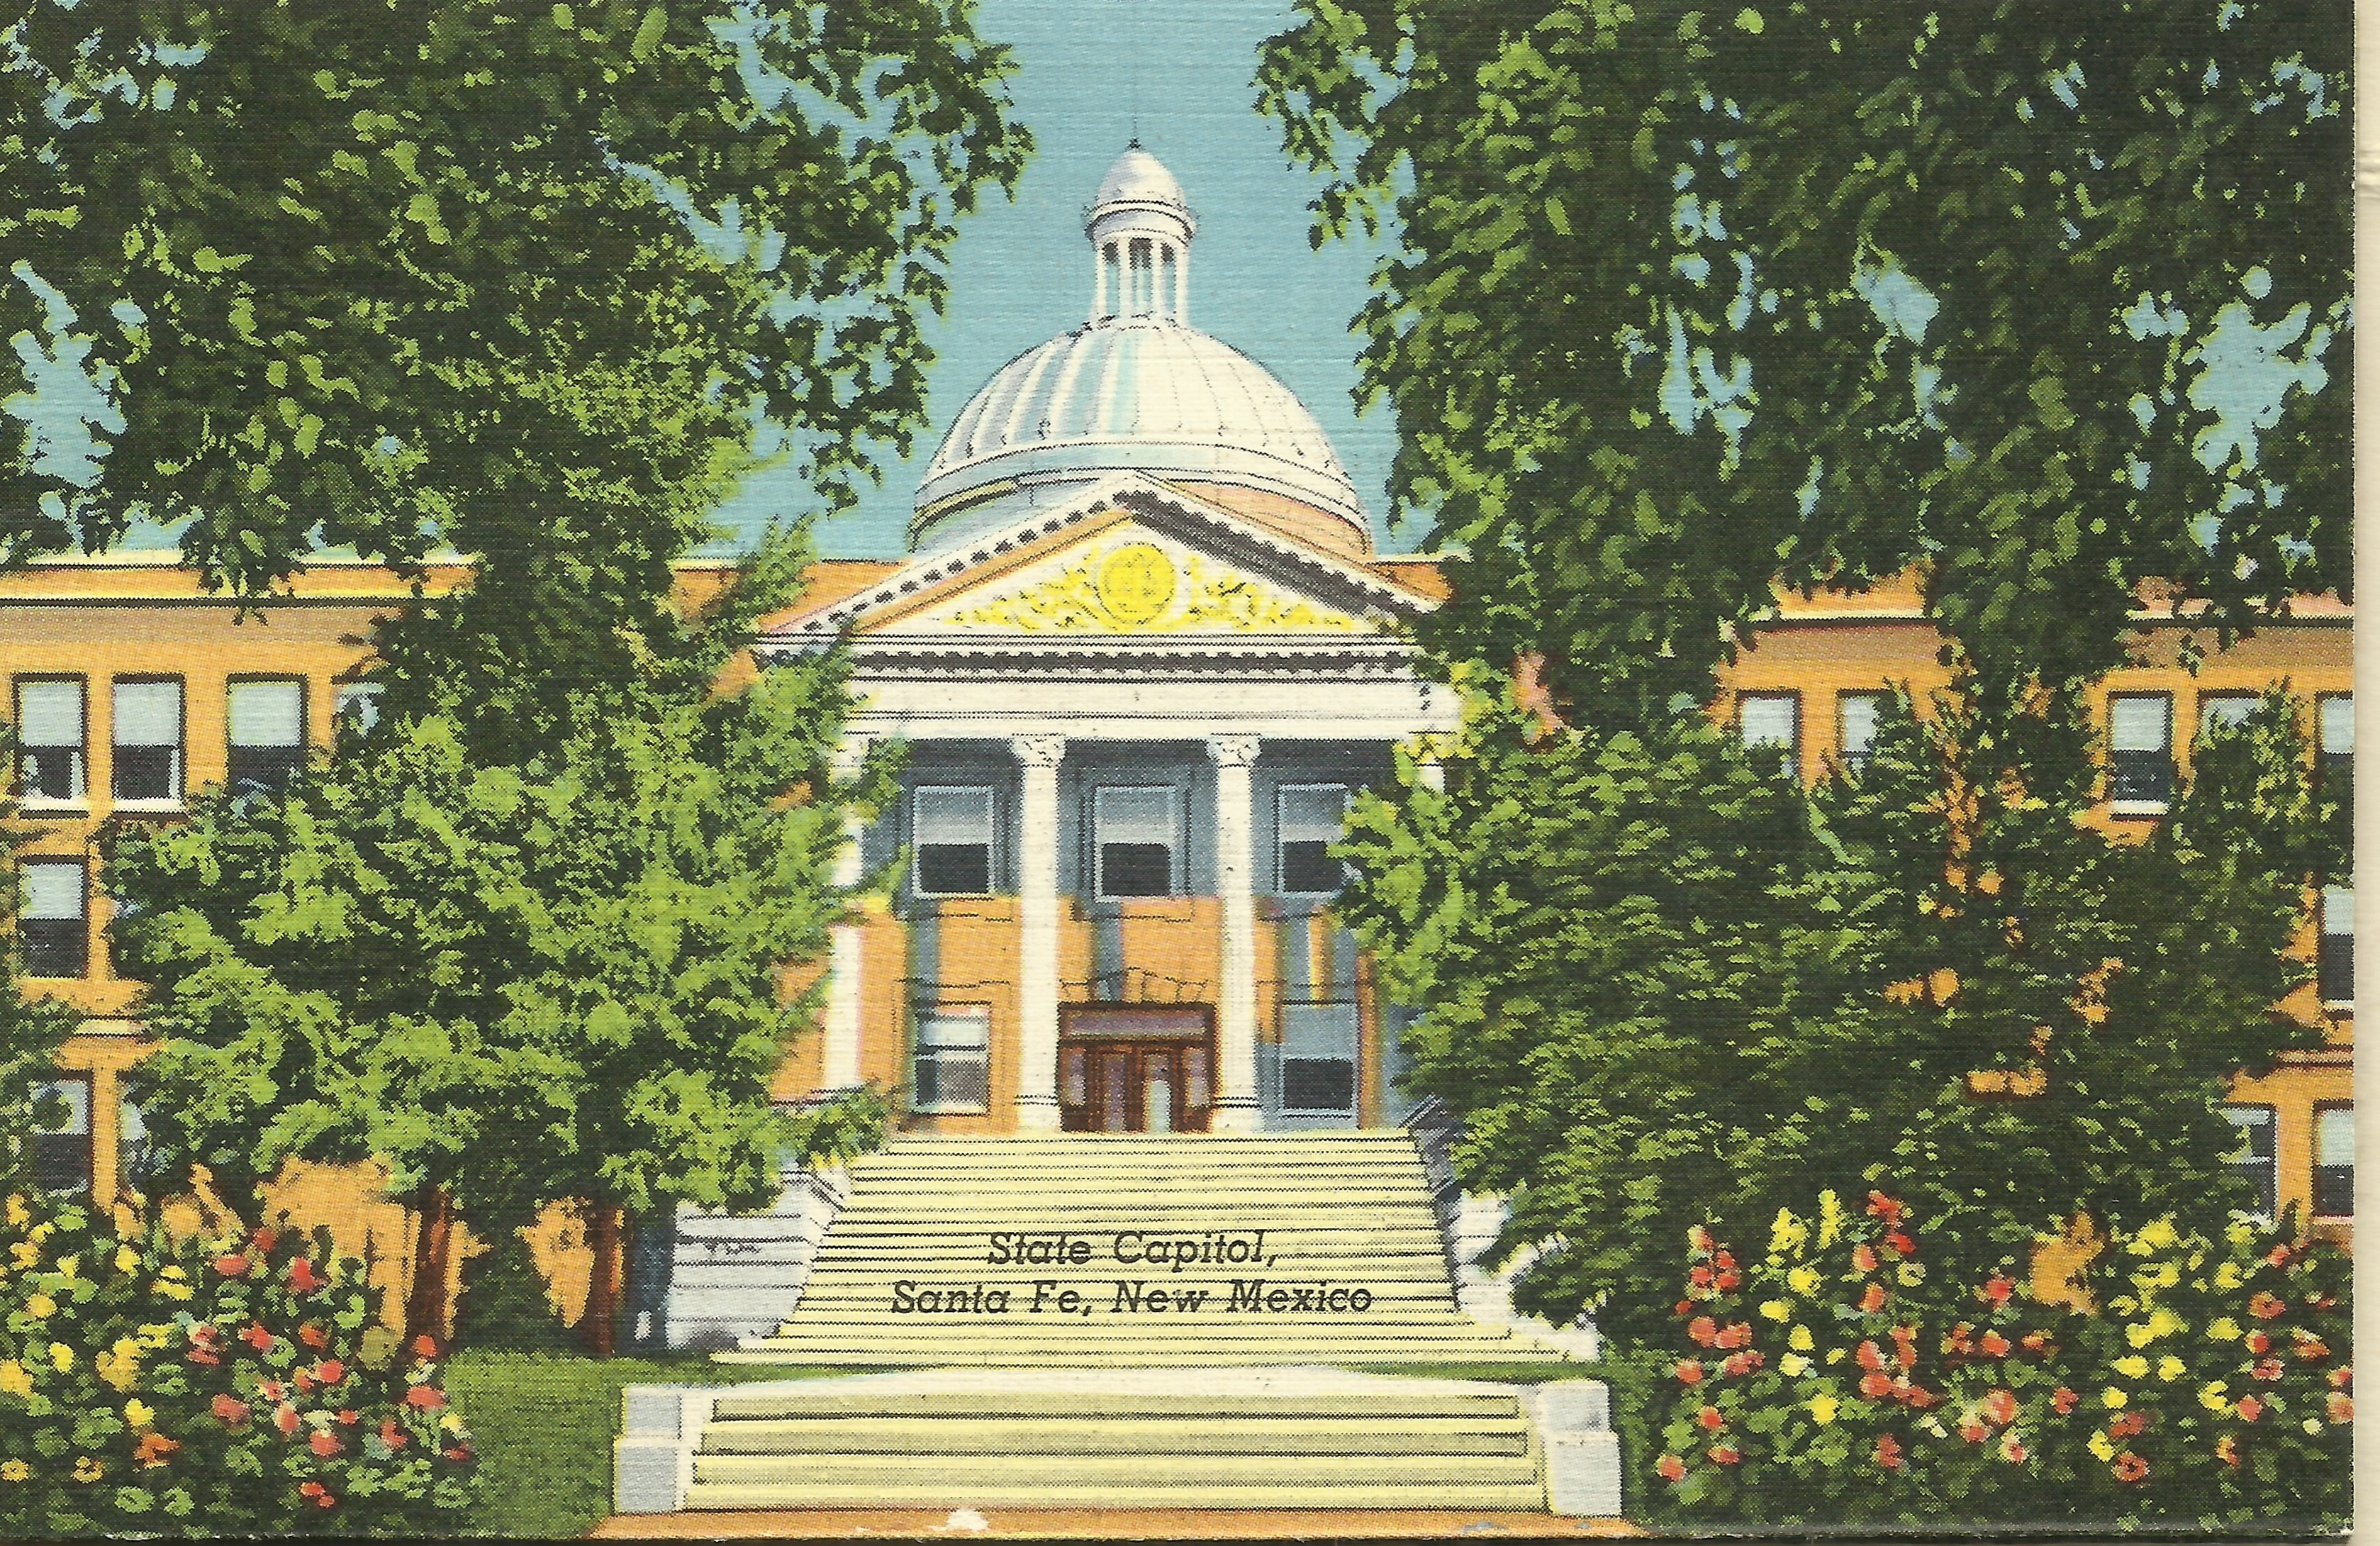 Postcard showing the old New Mexico State Capitol Building in Santa Fe (since replaced by 